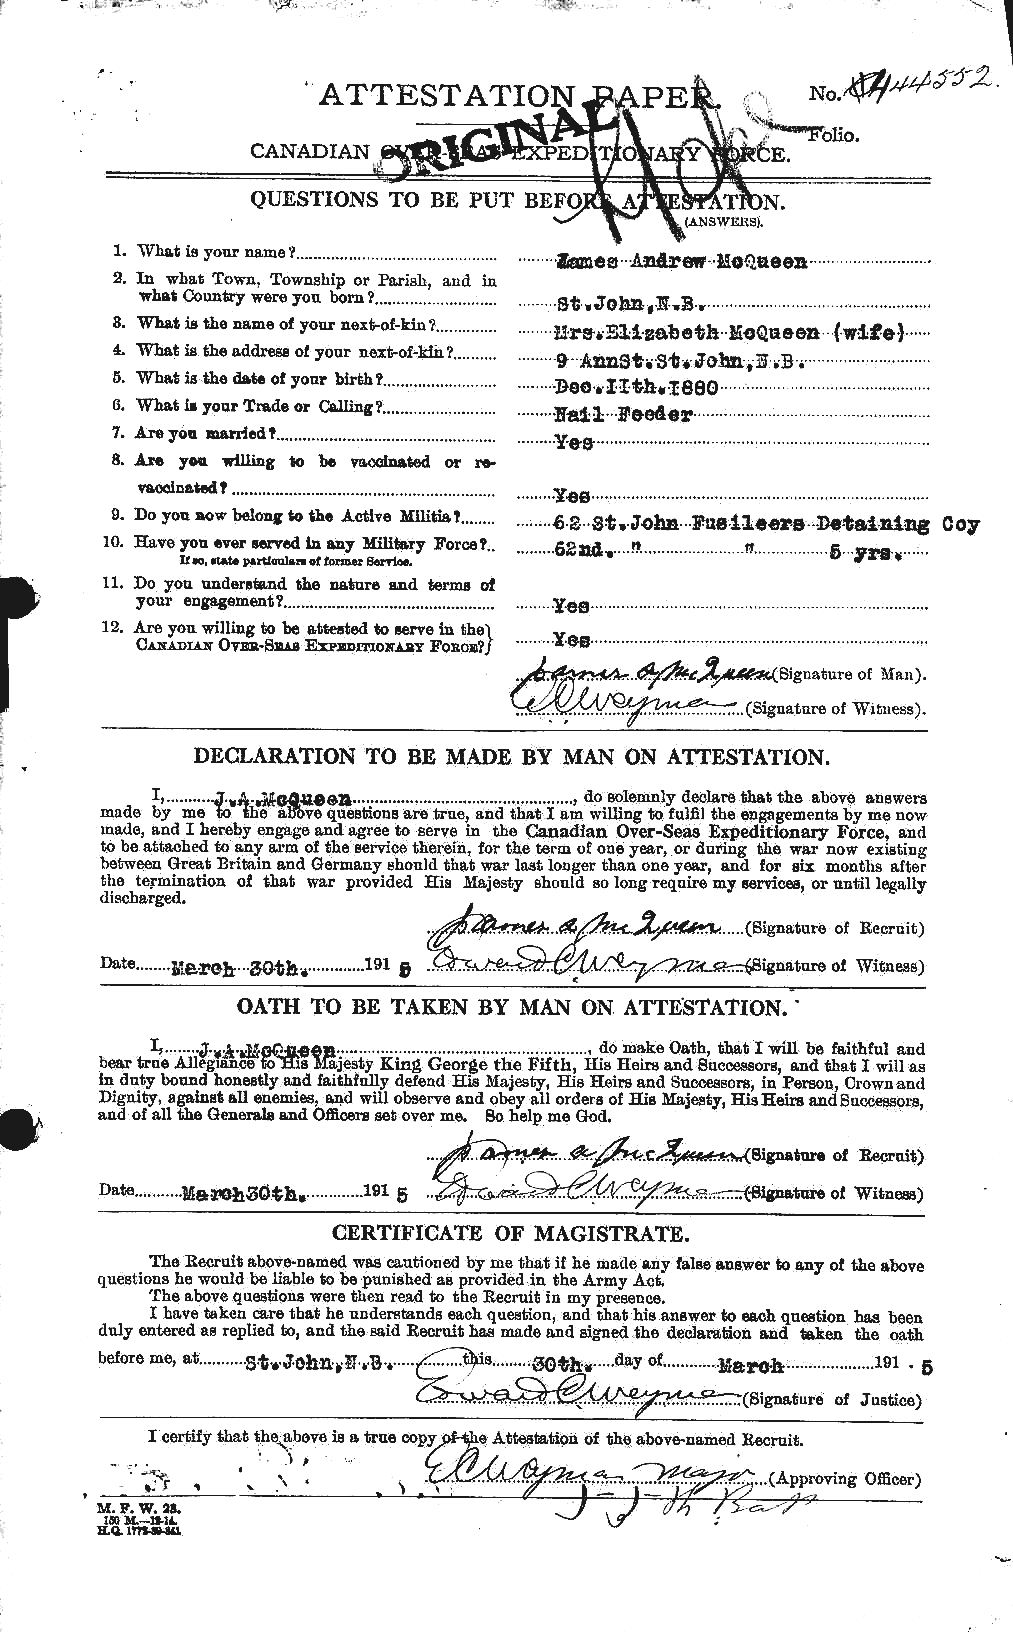 Personnel Records of the First World War - CEF 545926a